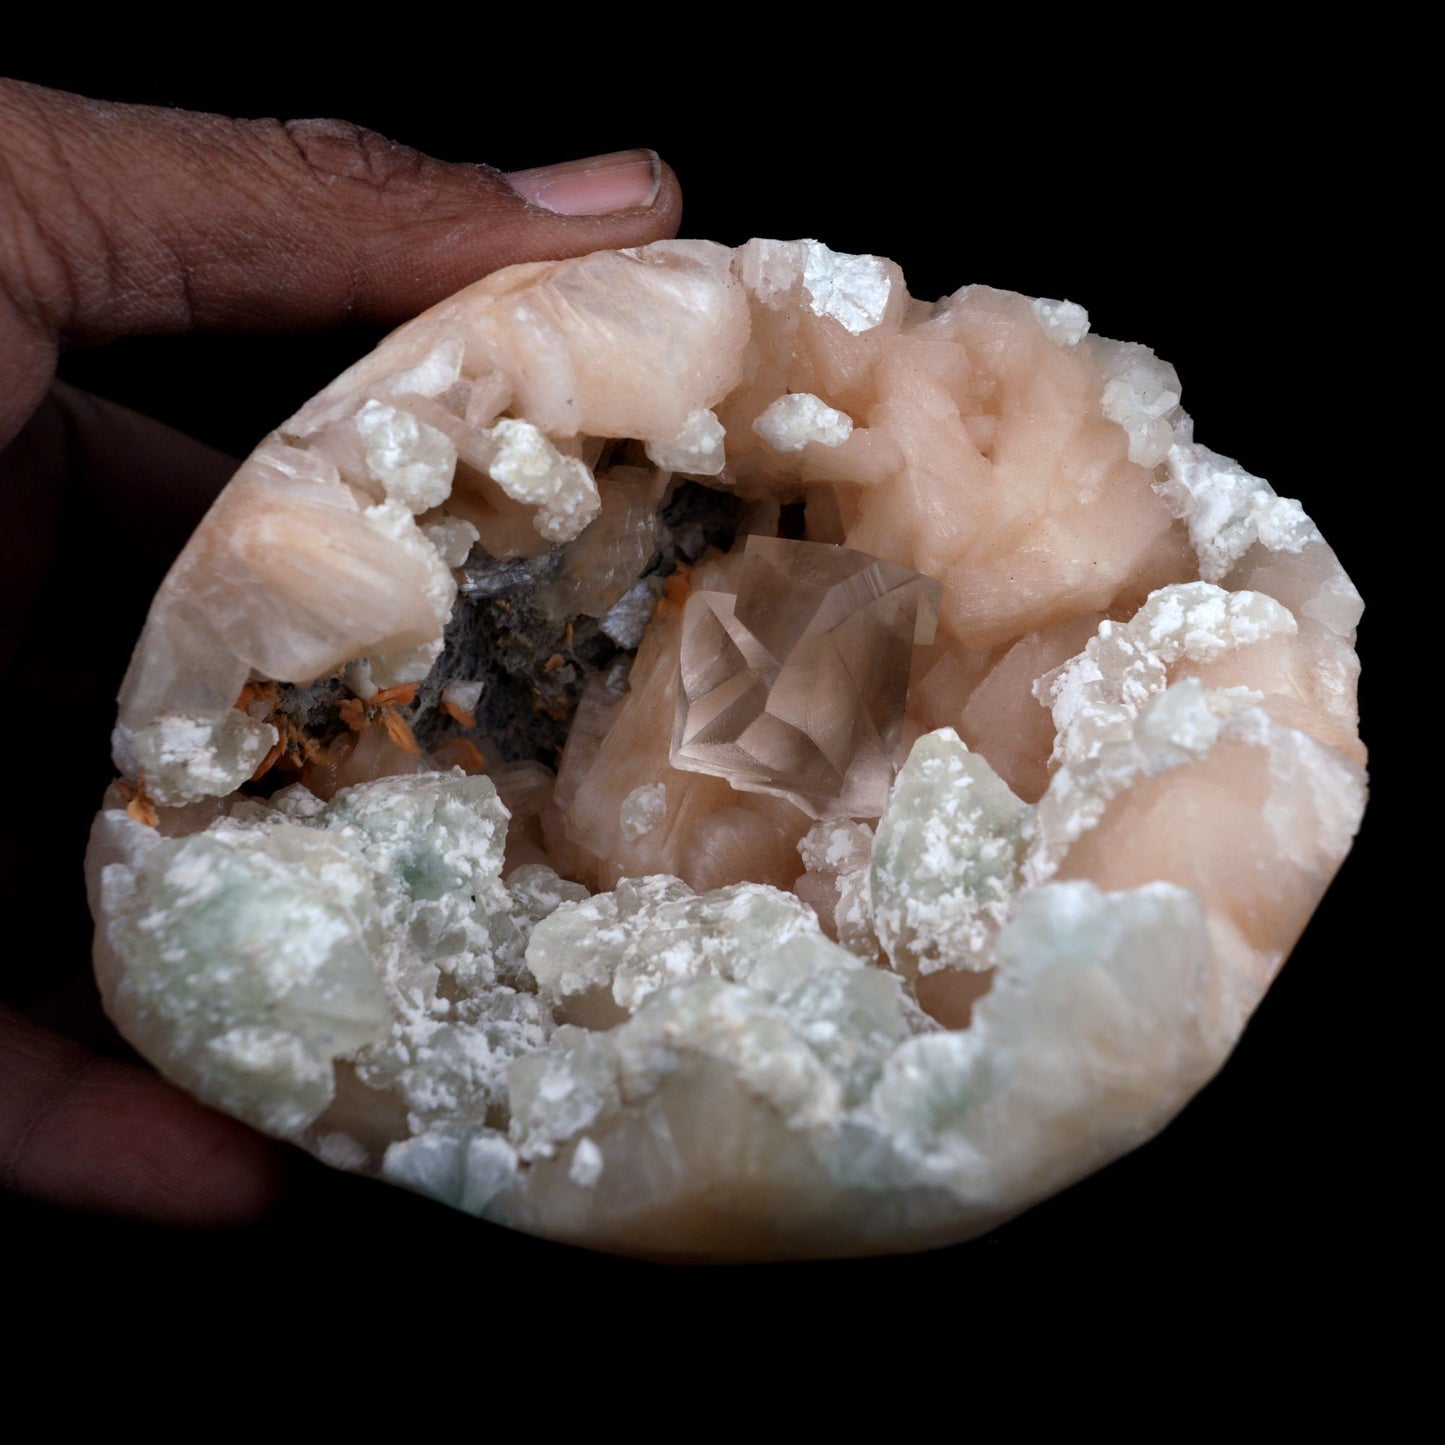 CalCalcite with Stilbite Apophyllite Geode Natural Mineral Specimen # …  https://www.superbminerals.us/products/copy-of-fluorite-botryoidal-on-mm-quartz-plate-natural-mineral-specimen-b-3949  Features Stunning specimen. It features a large, lustrous, transparent complex Calcite crystal, coverd with translucent, peach-colored intersecting Stilbite crystals, and numerous Apophyllite crystals, all set on a matrix of Chalcedony geode formation. It’s just an amazing piece – the clarity, contrast, symmetry